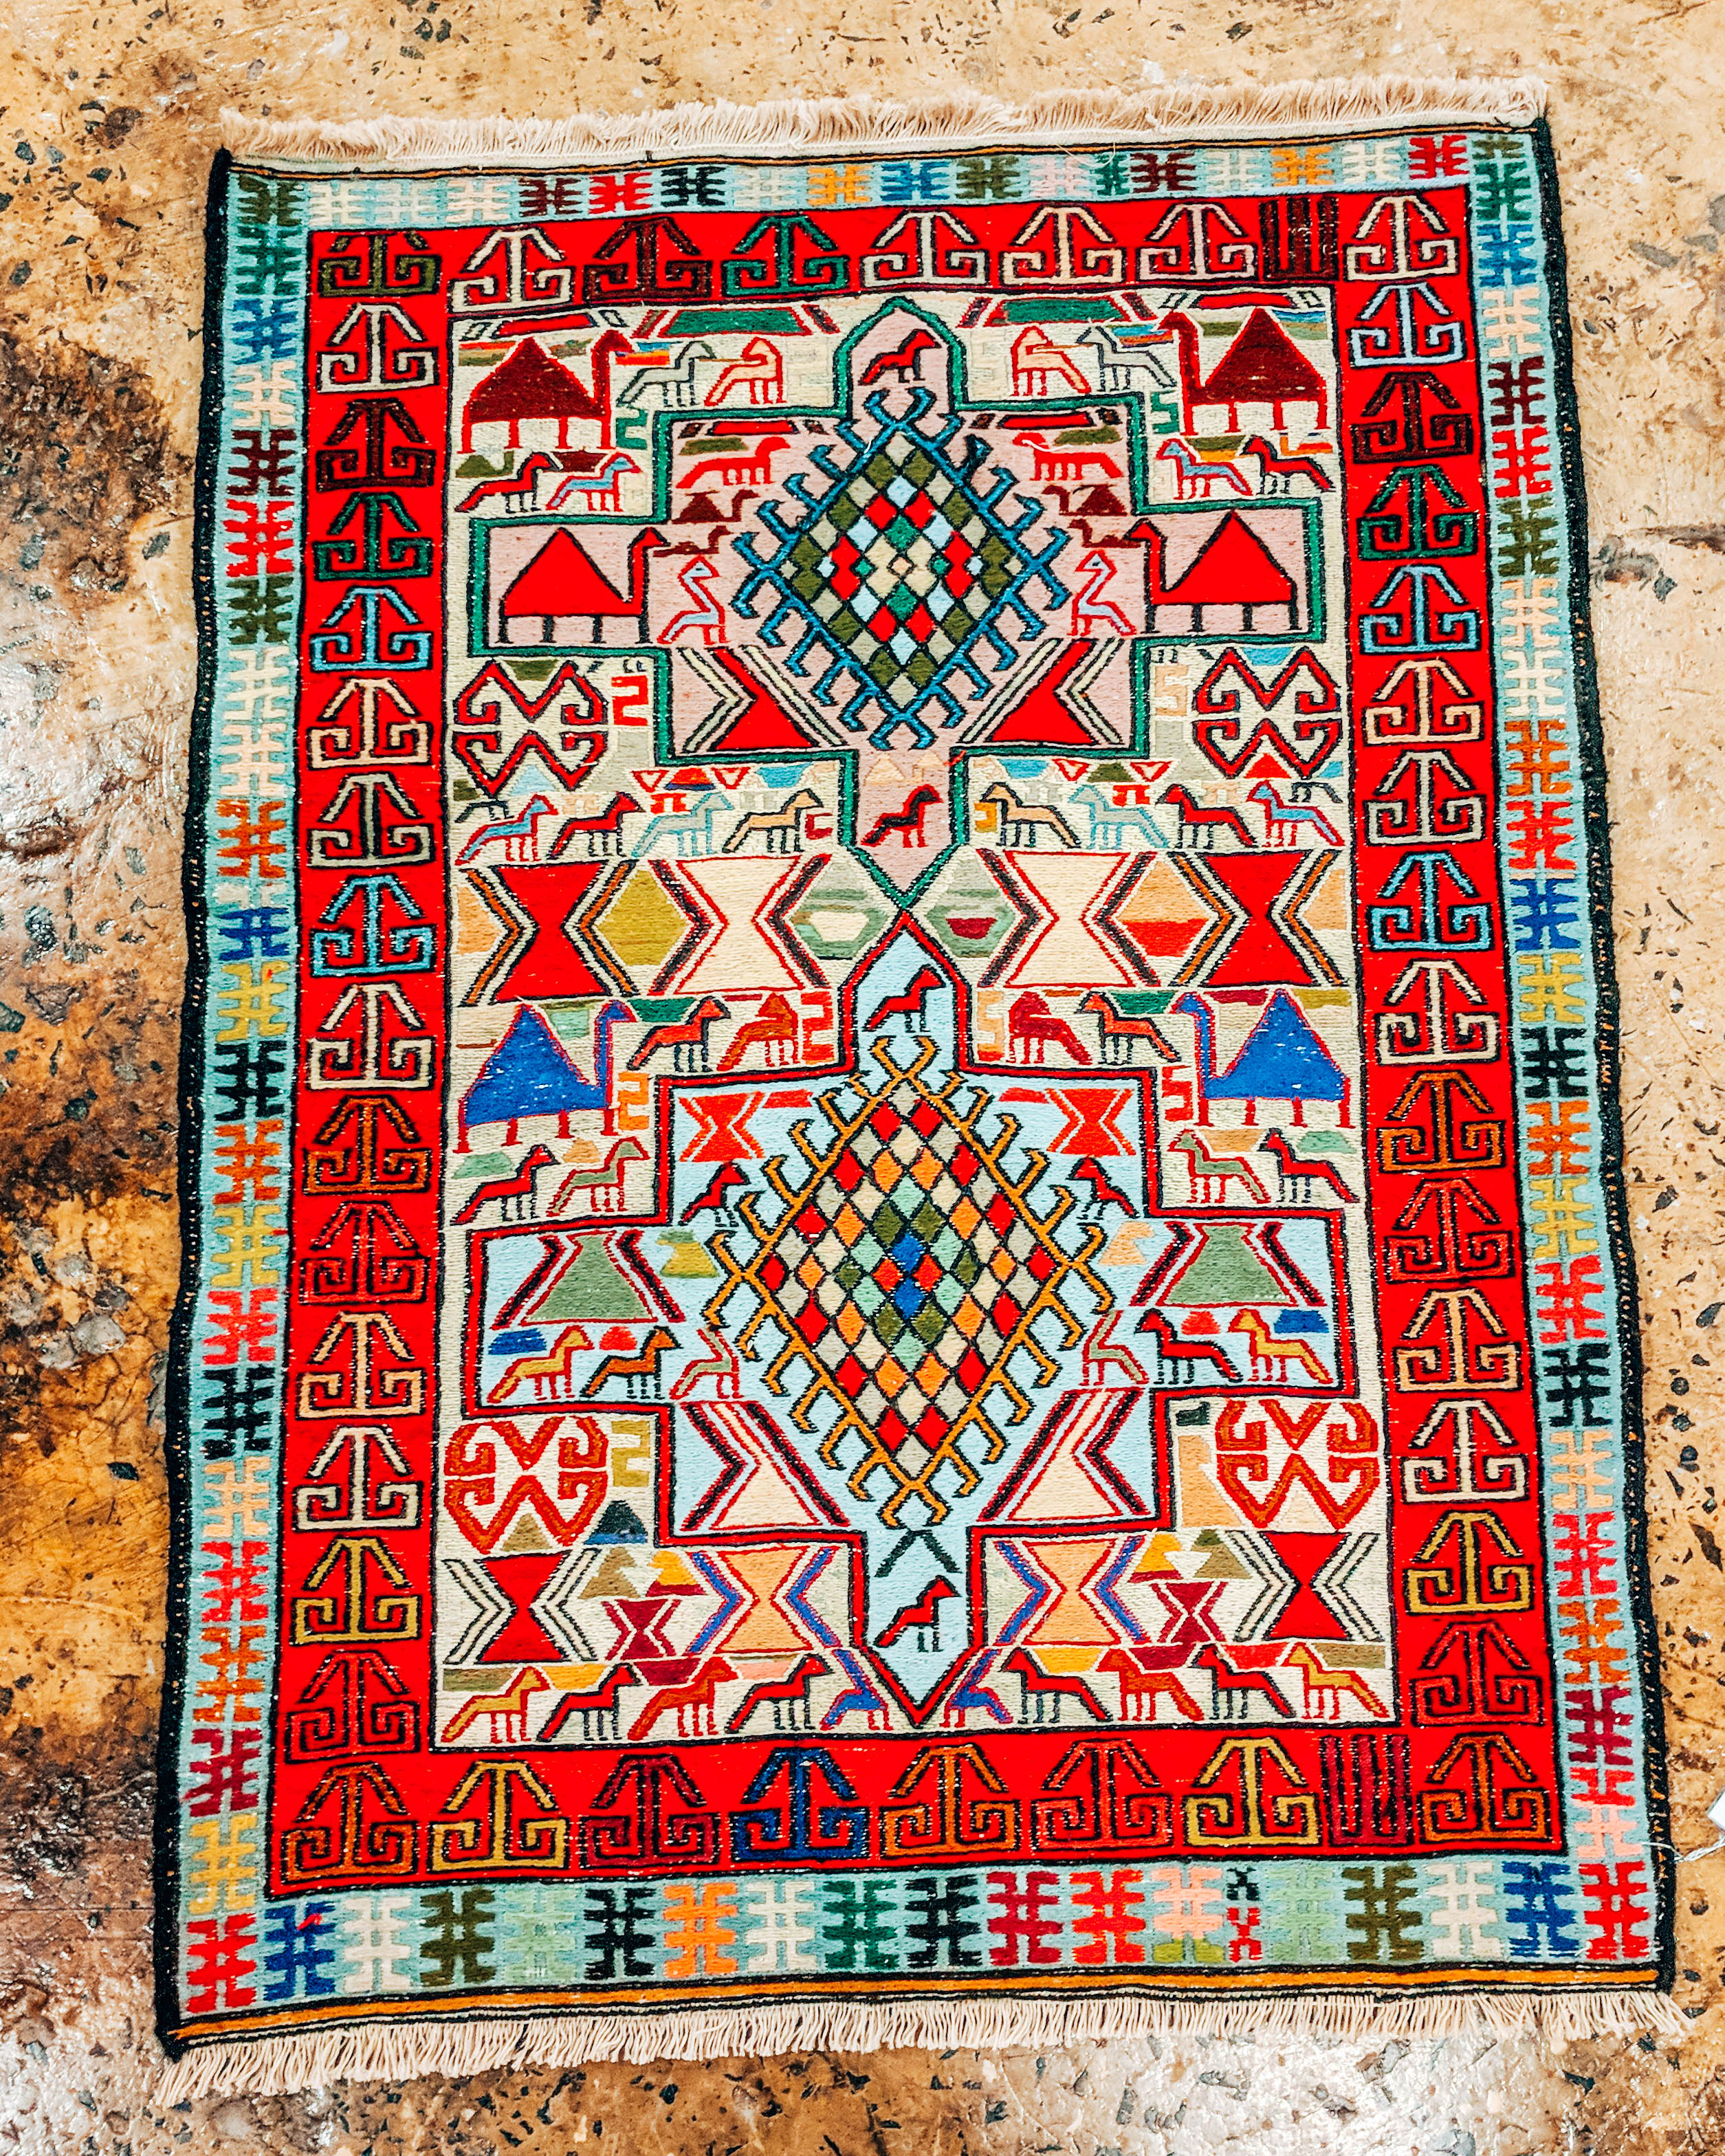 Armenian Carpets Thousands Of Years In The Making